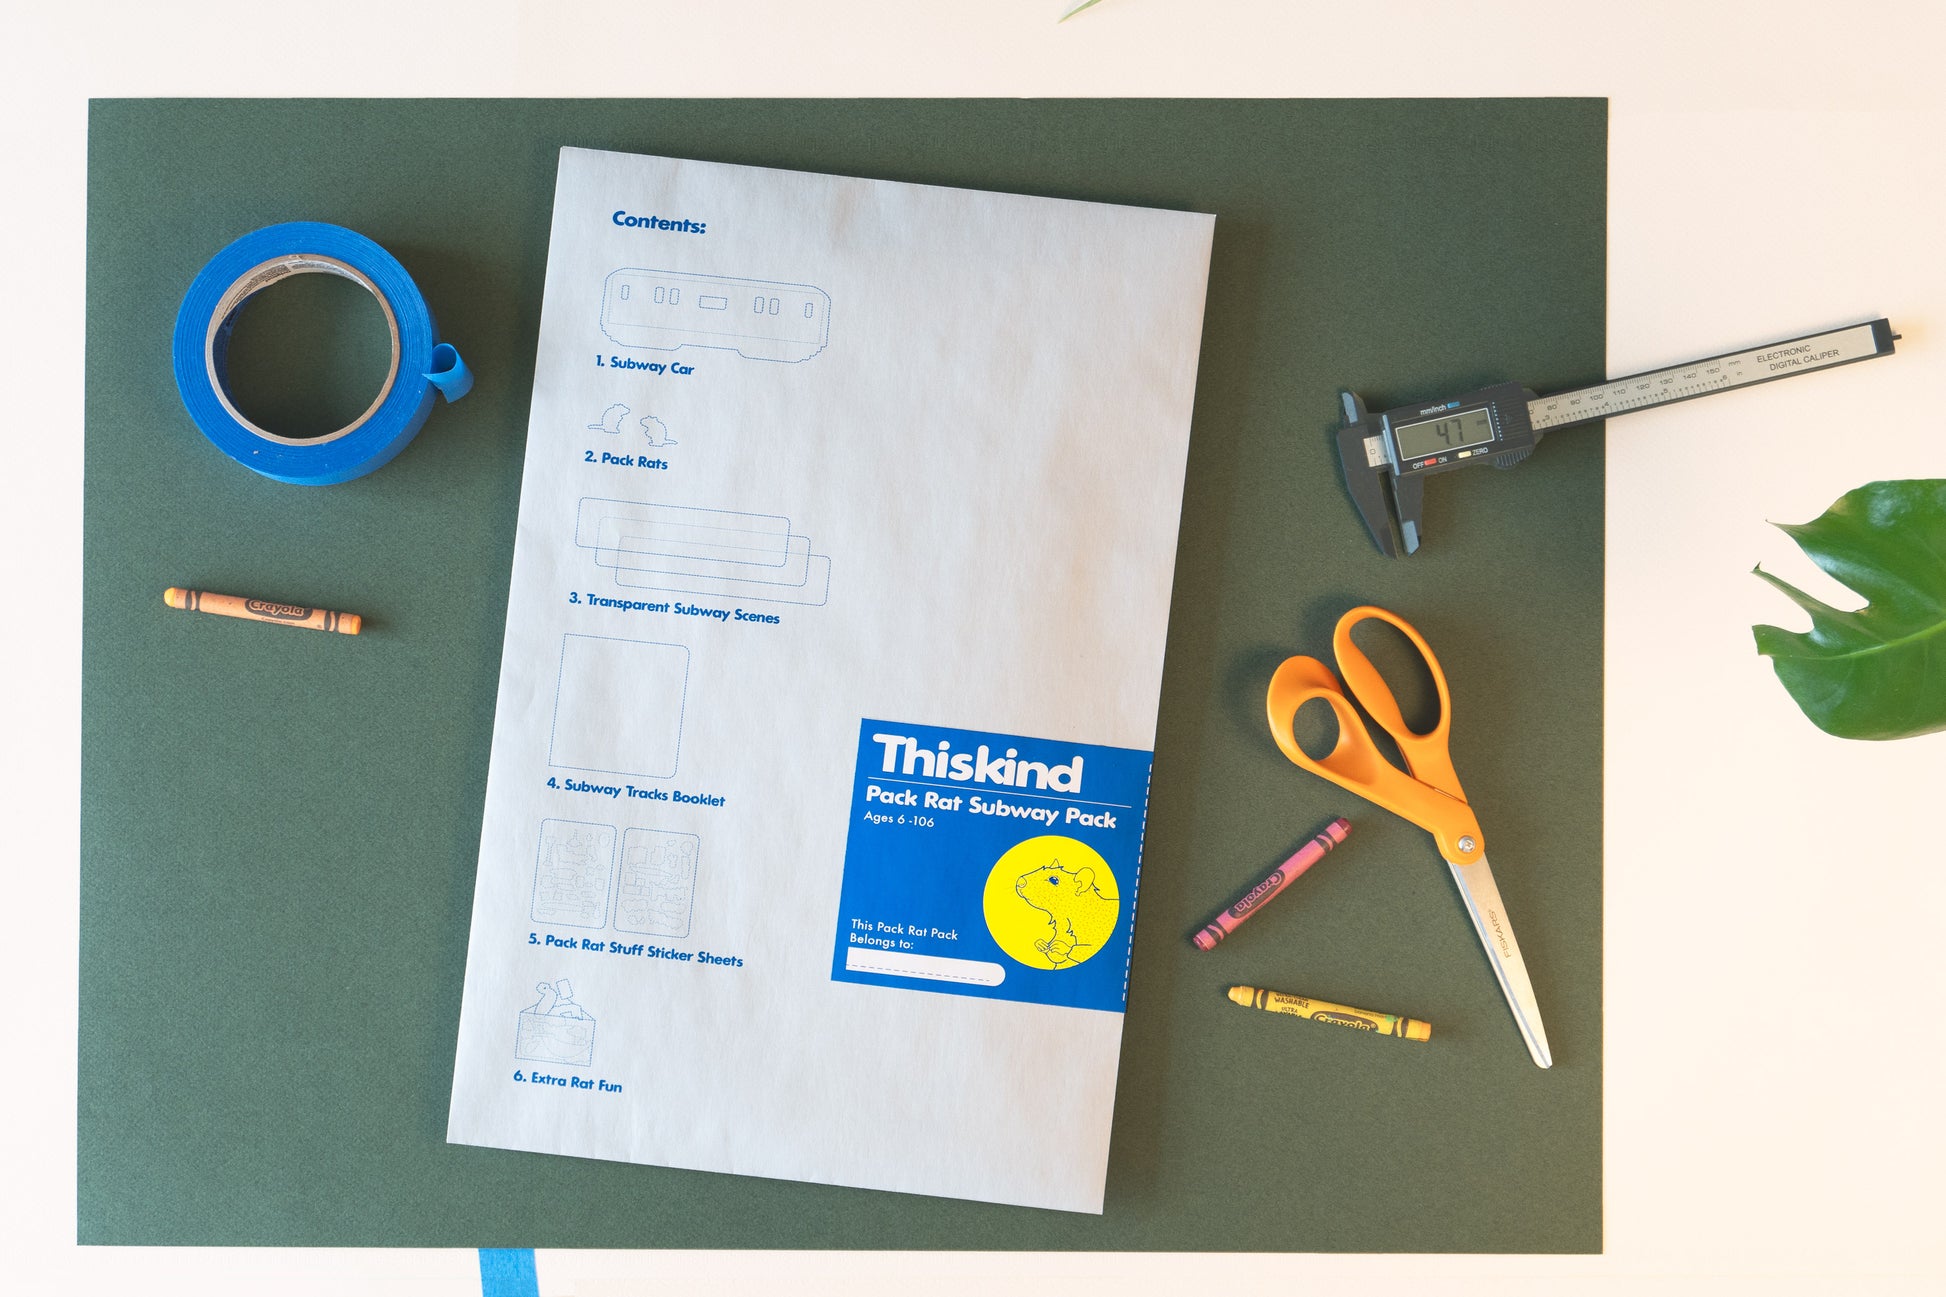 Image of Thiskind Pack Rat Subway Pack packaging. Light gray reusable paper envelope that lists contents, with blue and yellow branded label